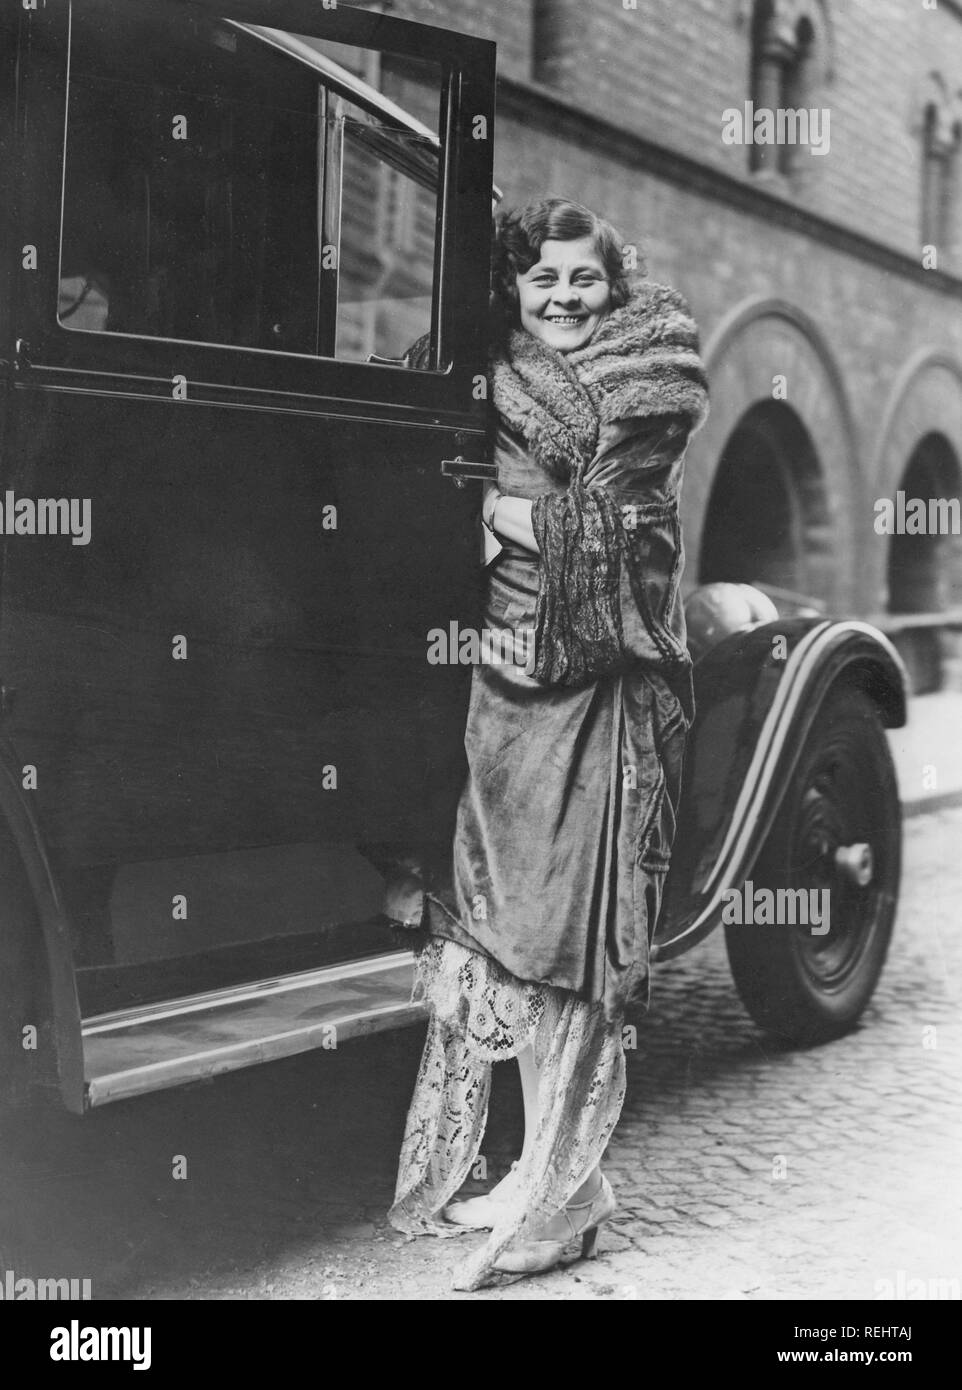 Women's fashion in the 1920s. A young woman in a typical 1920s clothes standing beside a car, opening the door. She is the swedish opera singer Marie Sundelius, 1884-1858. Soprano singer who sang at the Metropolitan in New York with Enrico Caruso. Stock Photo